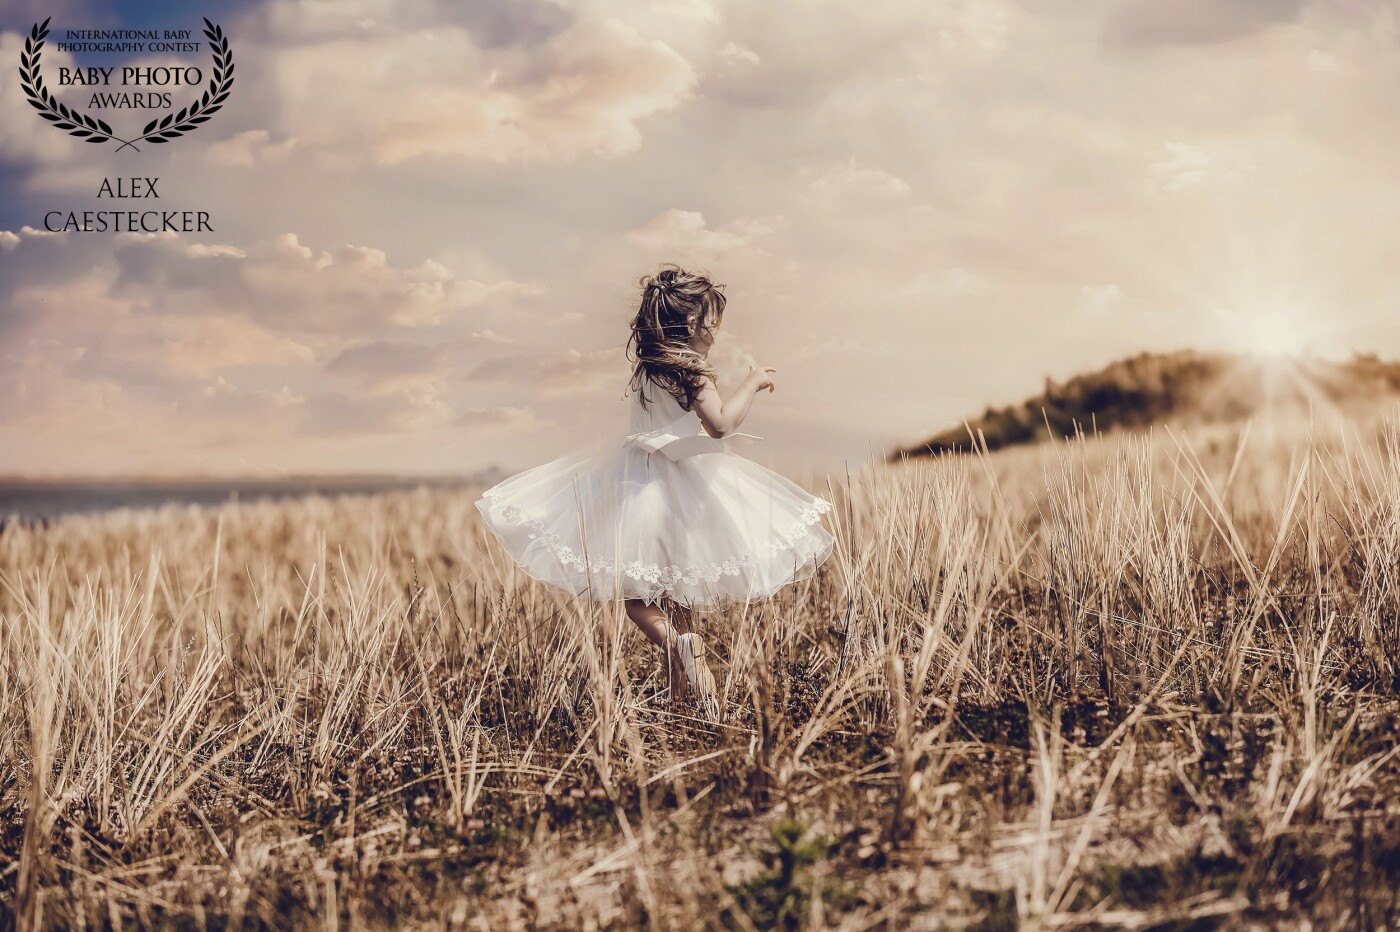 In fact, we were shooting the parents of this little girl. It was their wedding day.<br />
She had to wait a little bit while we were taking some pictures of her mom and dad.<br />
She decided to dance in the field... A quick shot of this moment resulted in this picture.